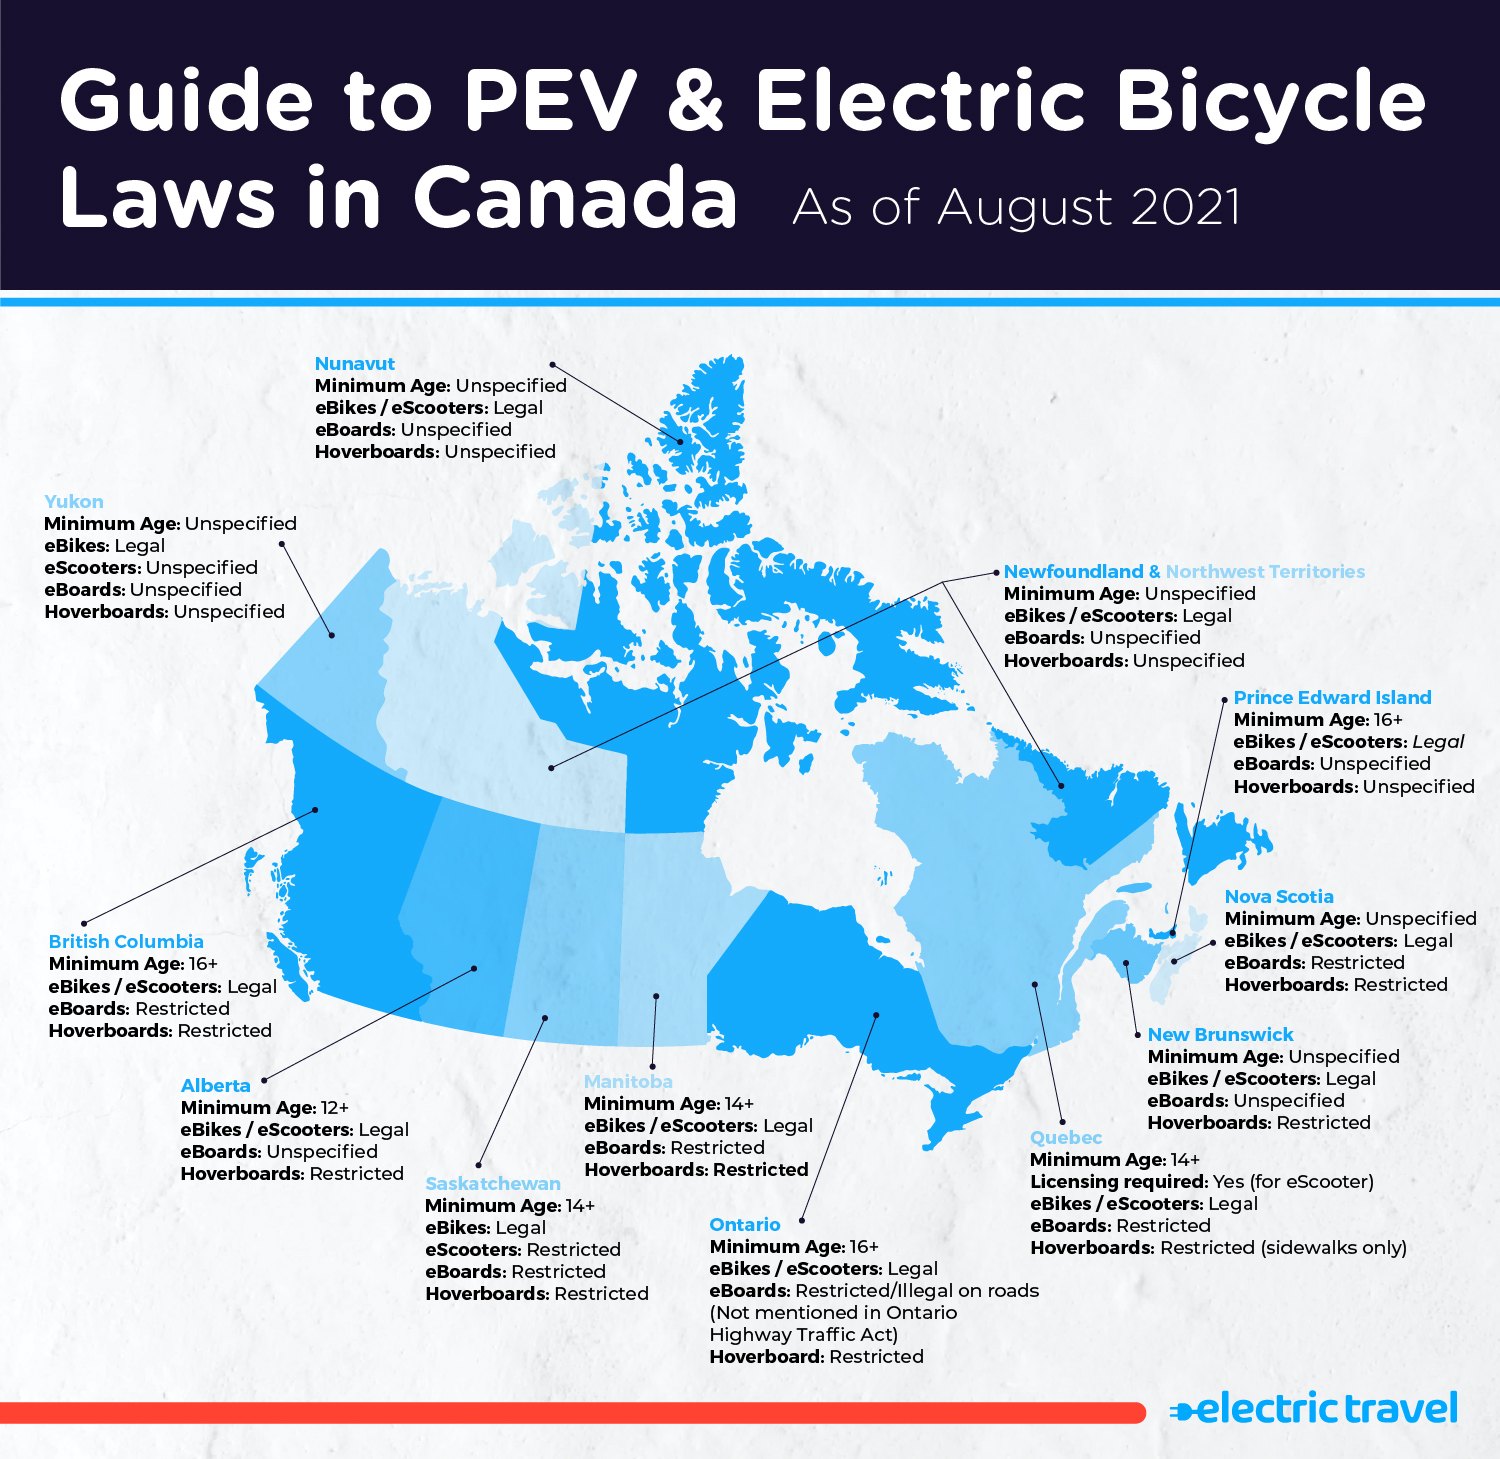 Guide to PEV and eBike laws in Canada (infographic)